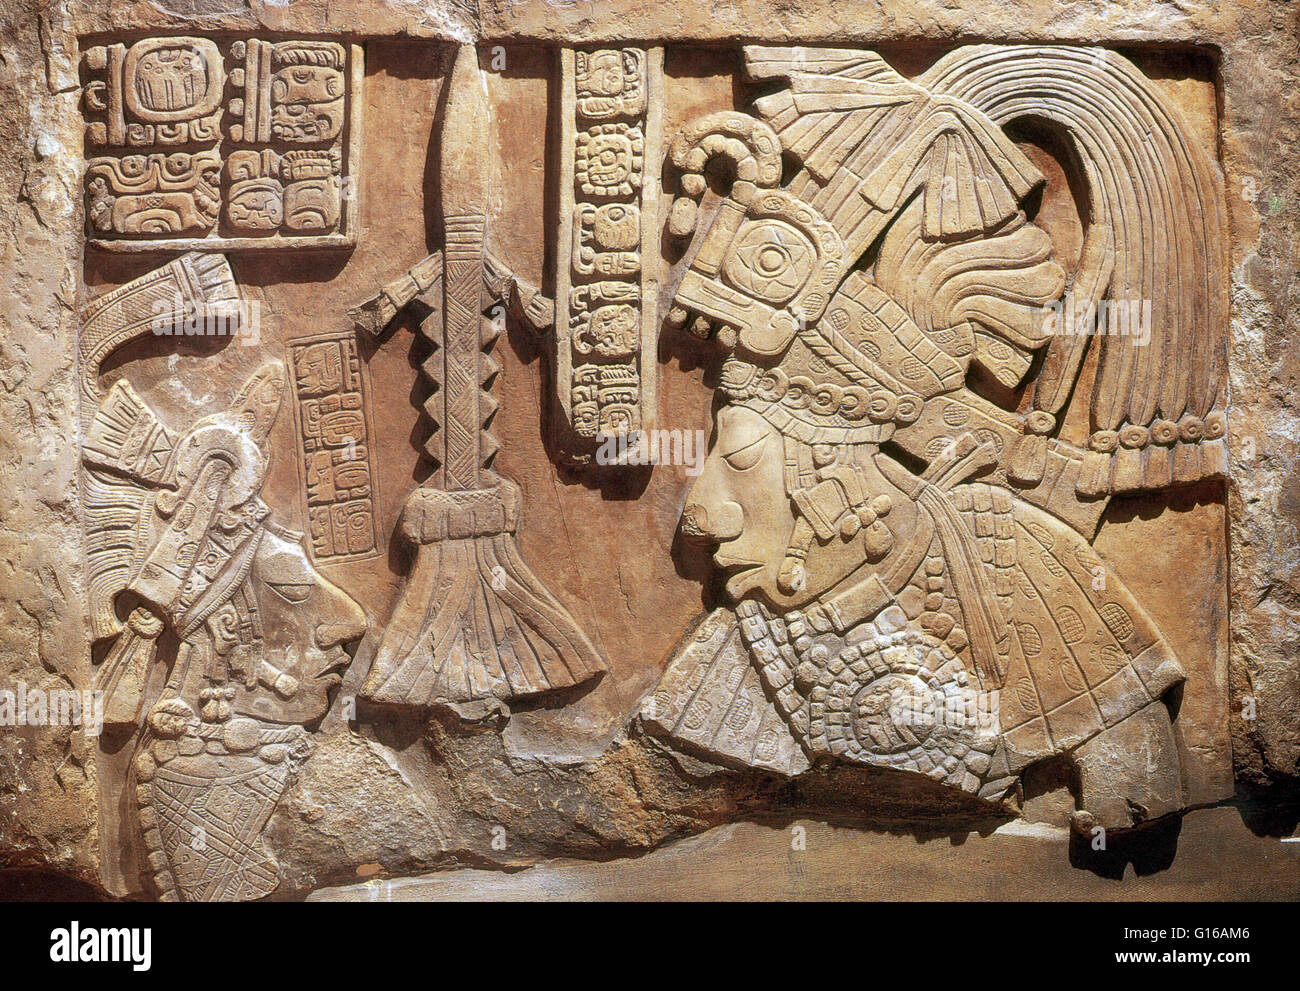 Maya Limestone Yaxchilan Lintel 41. Shows Yaxun B'alam, with a female figure, Lady Wak, both dressed in war costume and wearing Tlaloc headdress. Yaxun B'alam IV, also called Bird Jaguar IV, was a Mayan king from Yaxchilan. He ruled from 752 until 768 AD, Stock Photo